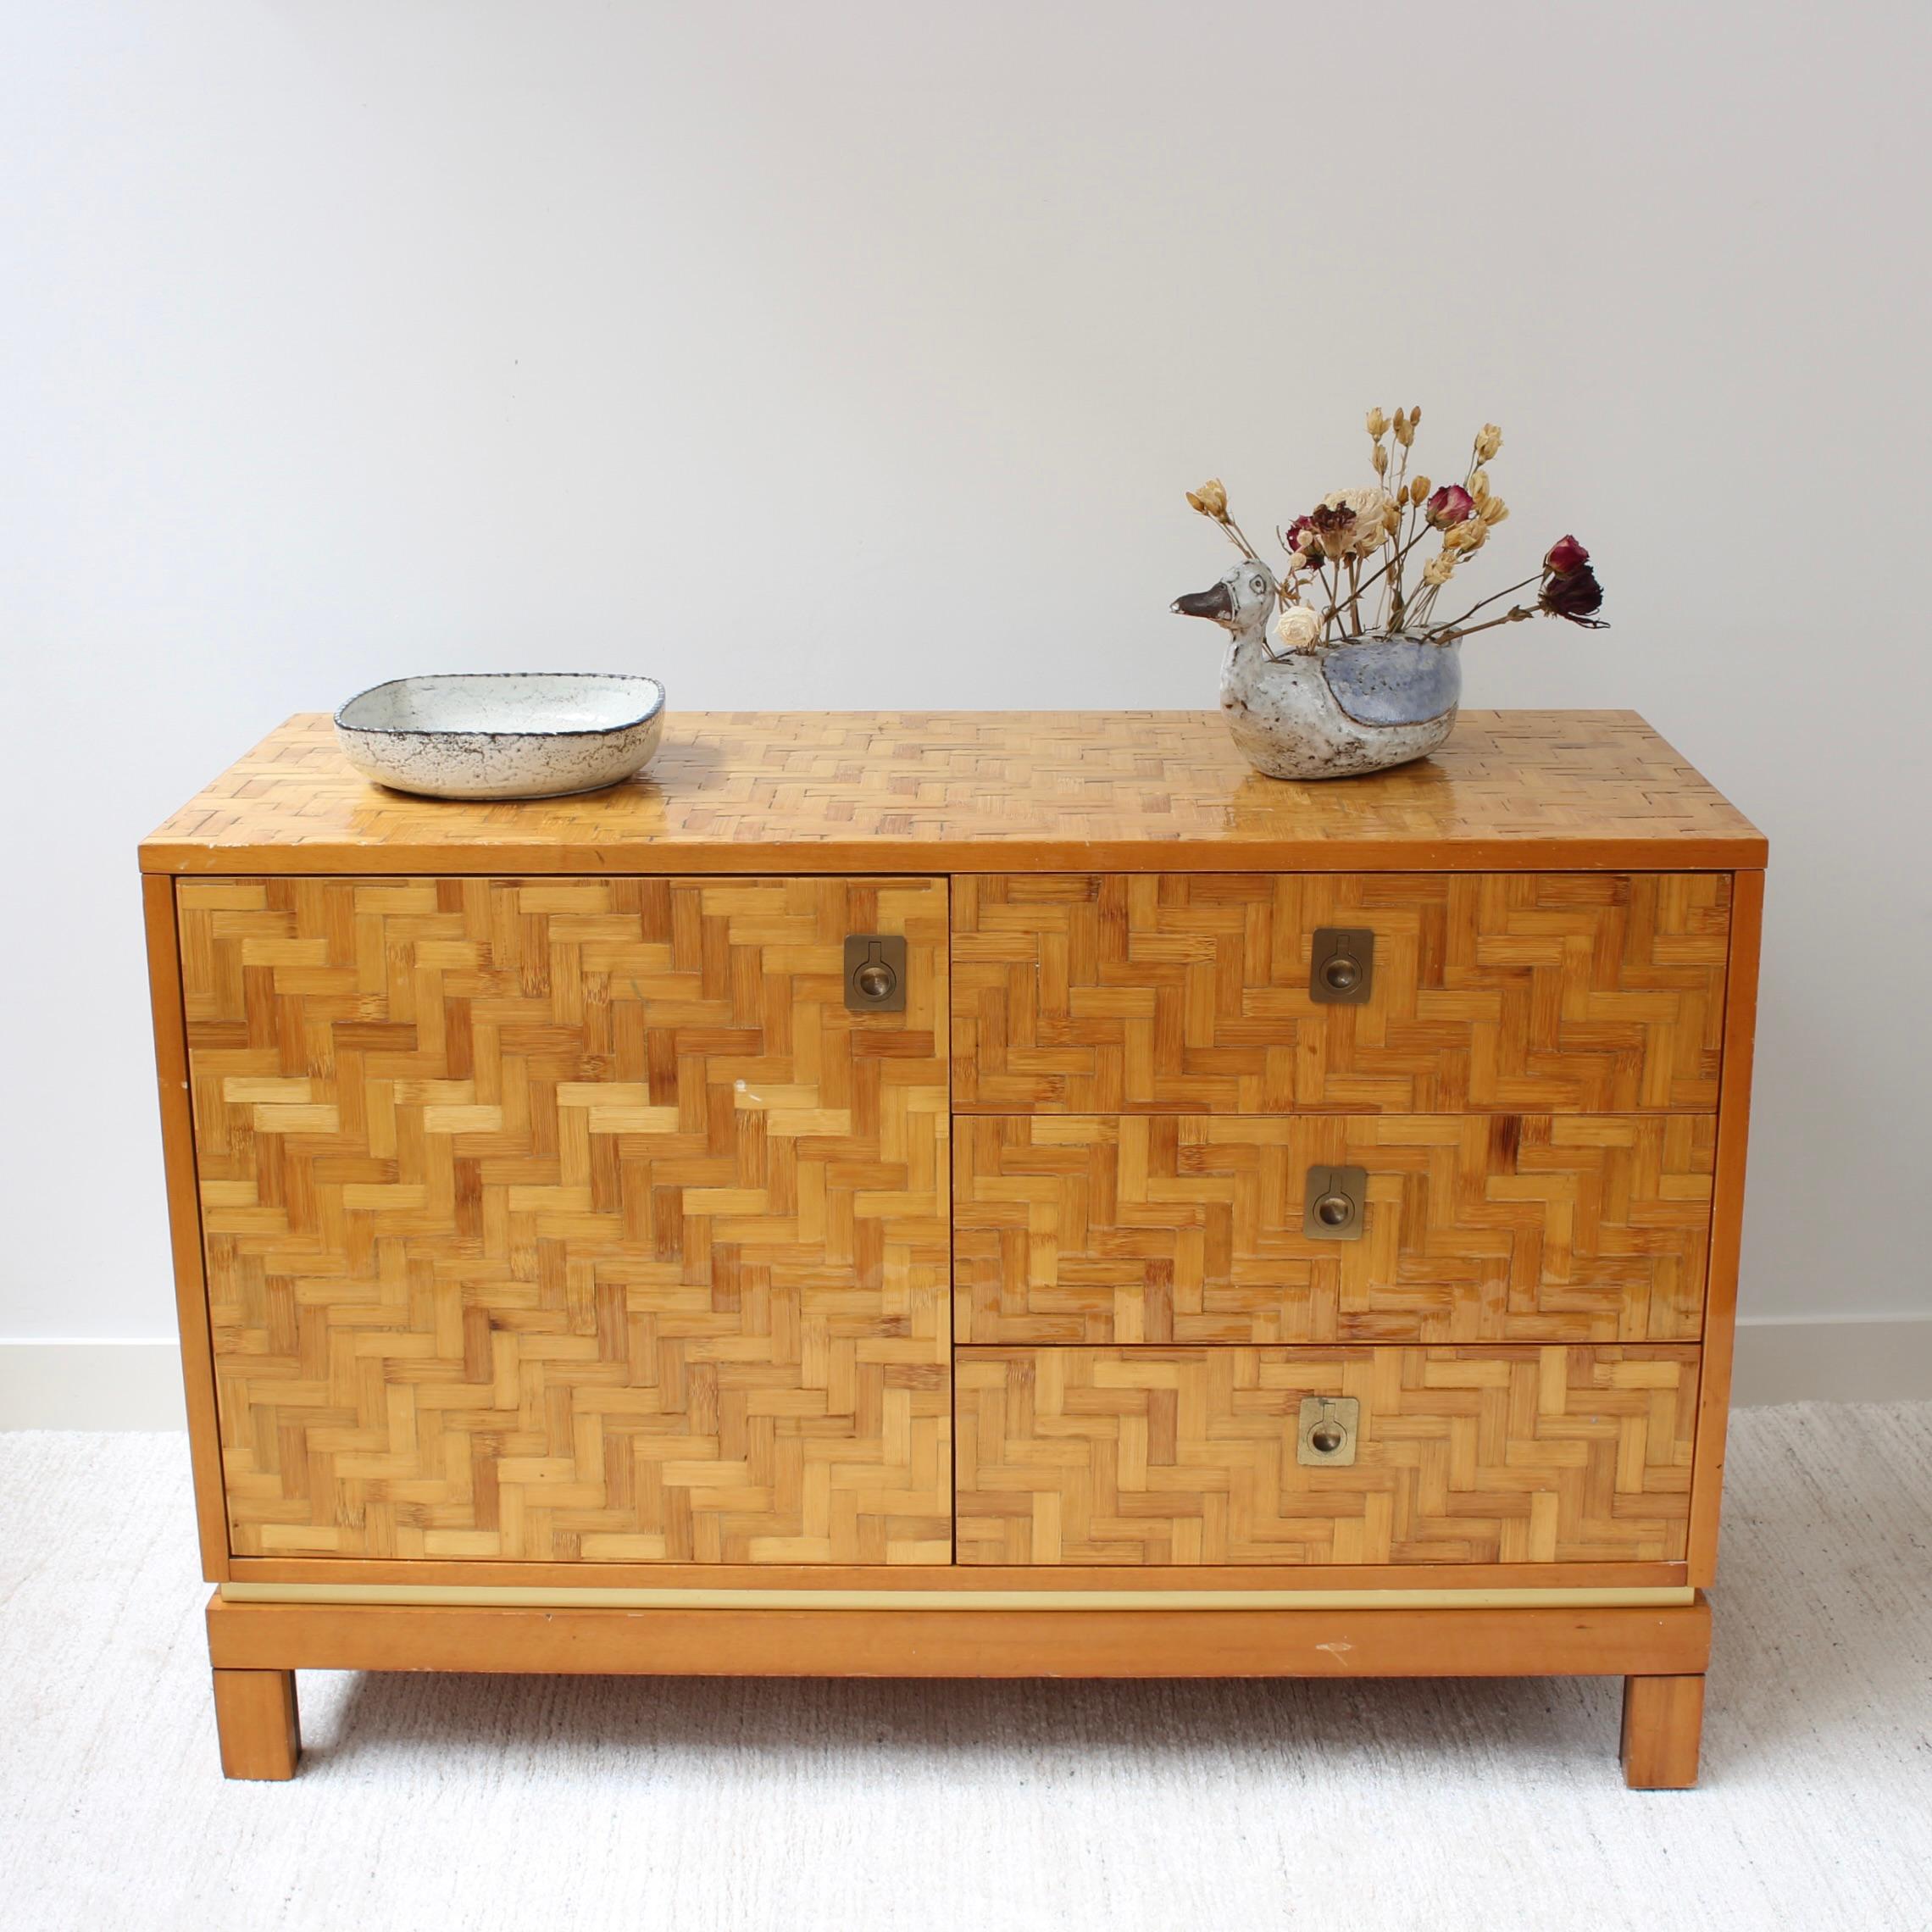 Italian vintage lacquered bamboo marquetry credenza (circa 1970s). Charming piece with three drawers and two shelves of spacious storage surfaces, all with very smart brass exterior fittings. There is some question about the maker - several dealers